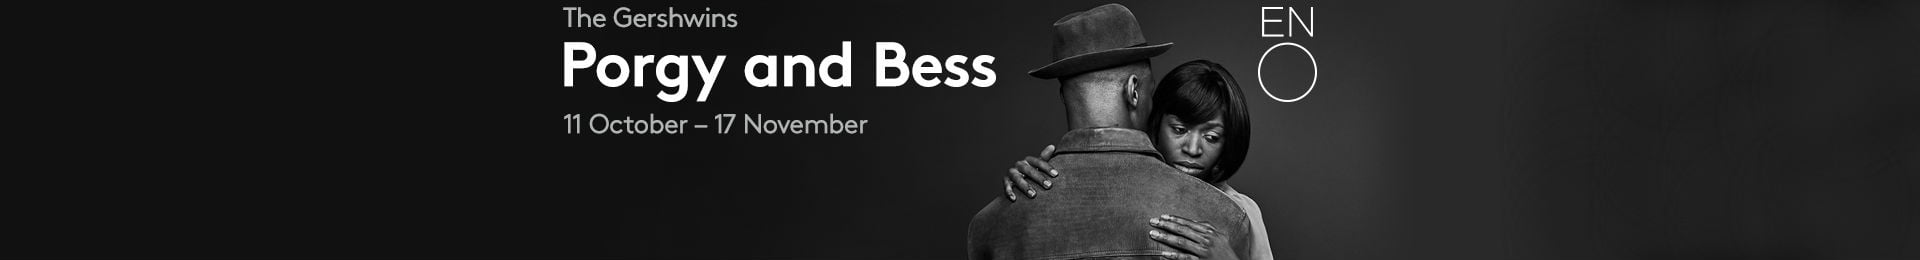 Porgy and Bess tickets